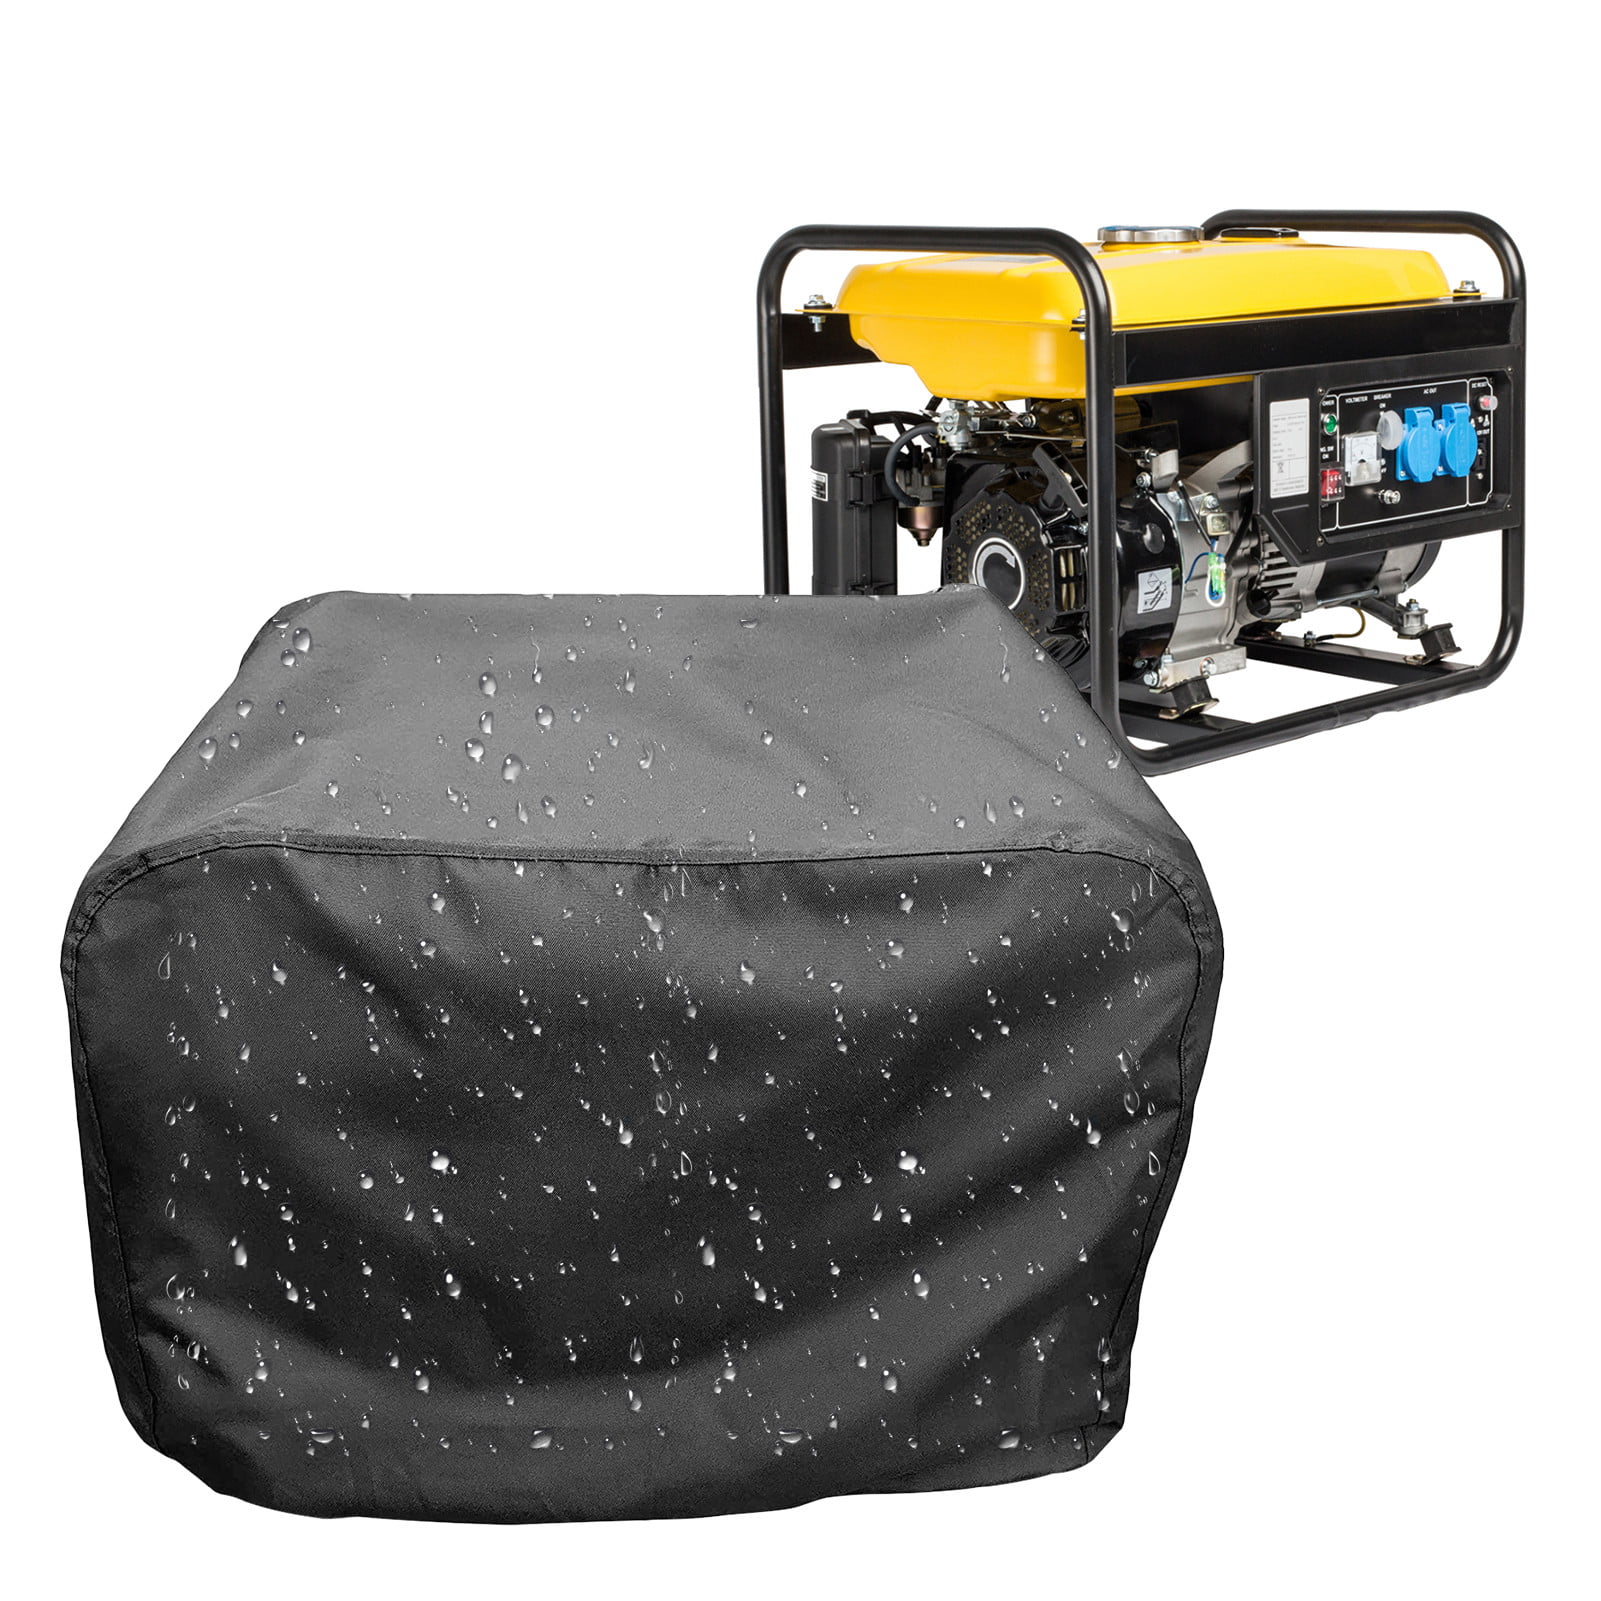 ZARUP Generator Cover Waterproof Heavy Duty Thicken 210D Polyester Weather/UV Resistant Generator Cover for Universal Portable Generators Grill Covers 26x20.1x20.1in 